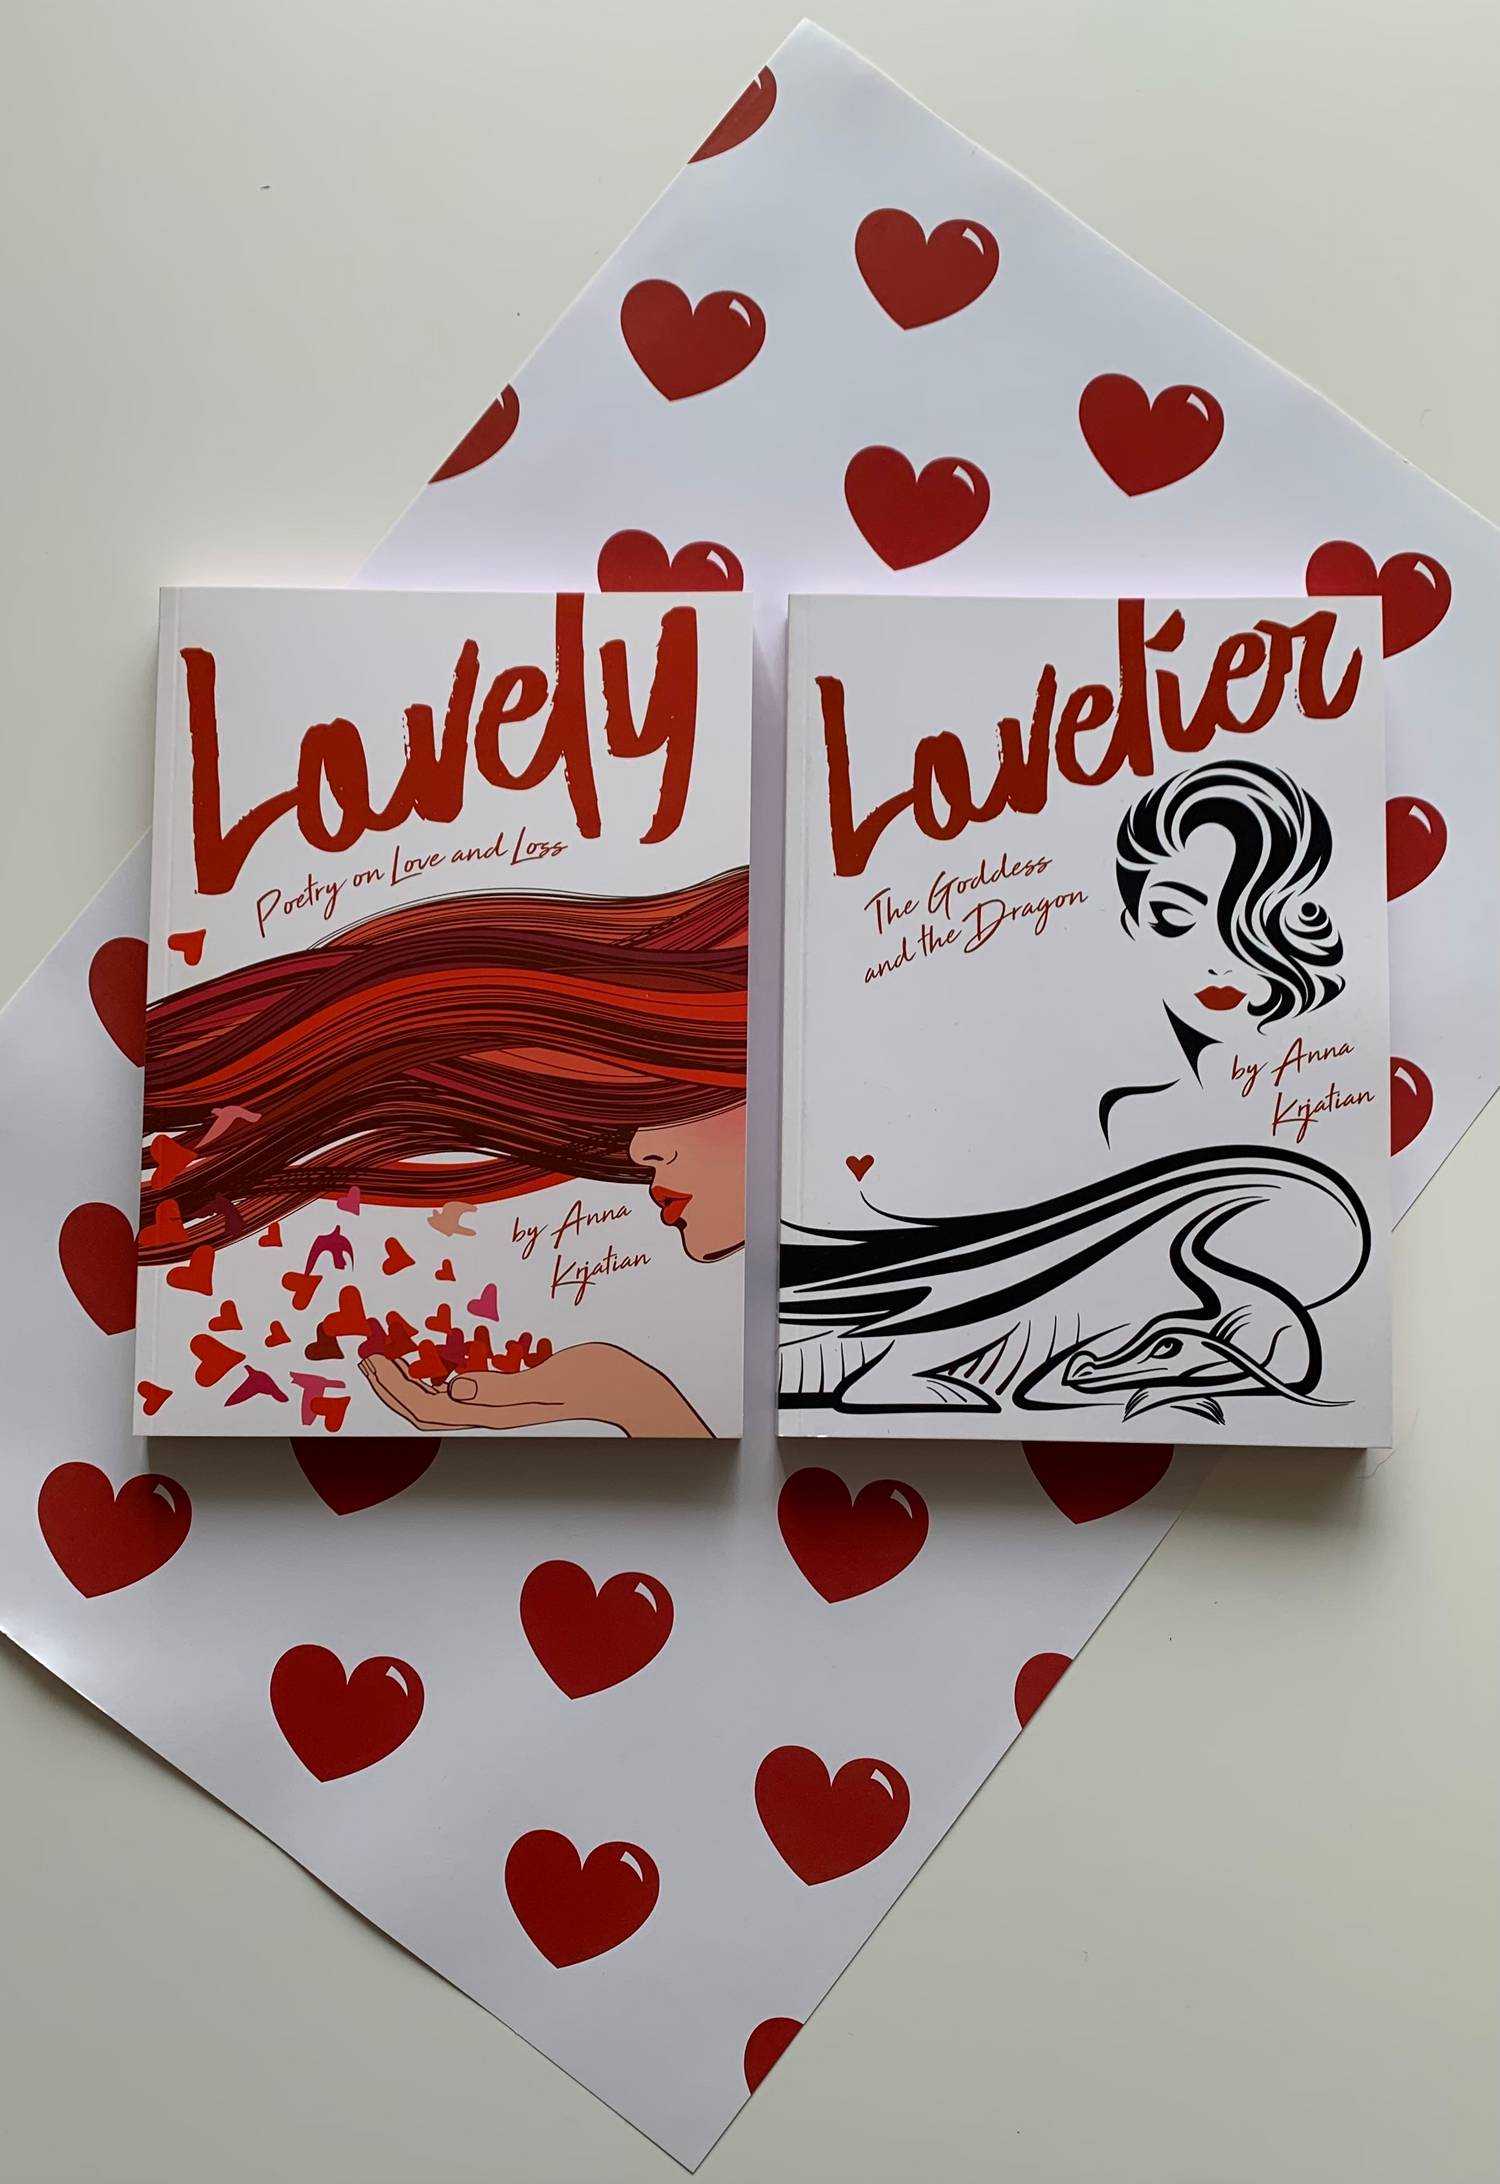 Two books "Lovely - Poetry on Love and Loss" and "Lovelier - The Goddess and The Dragon" sit on top of a white wrapping paper with bright red hearts on it.